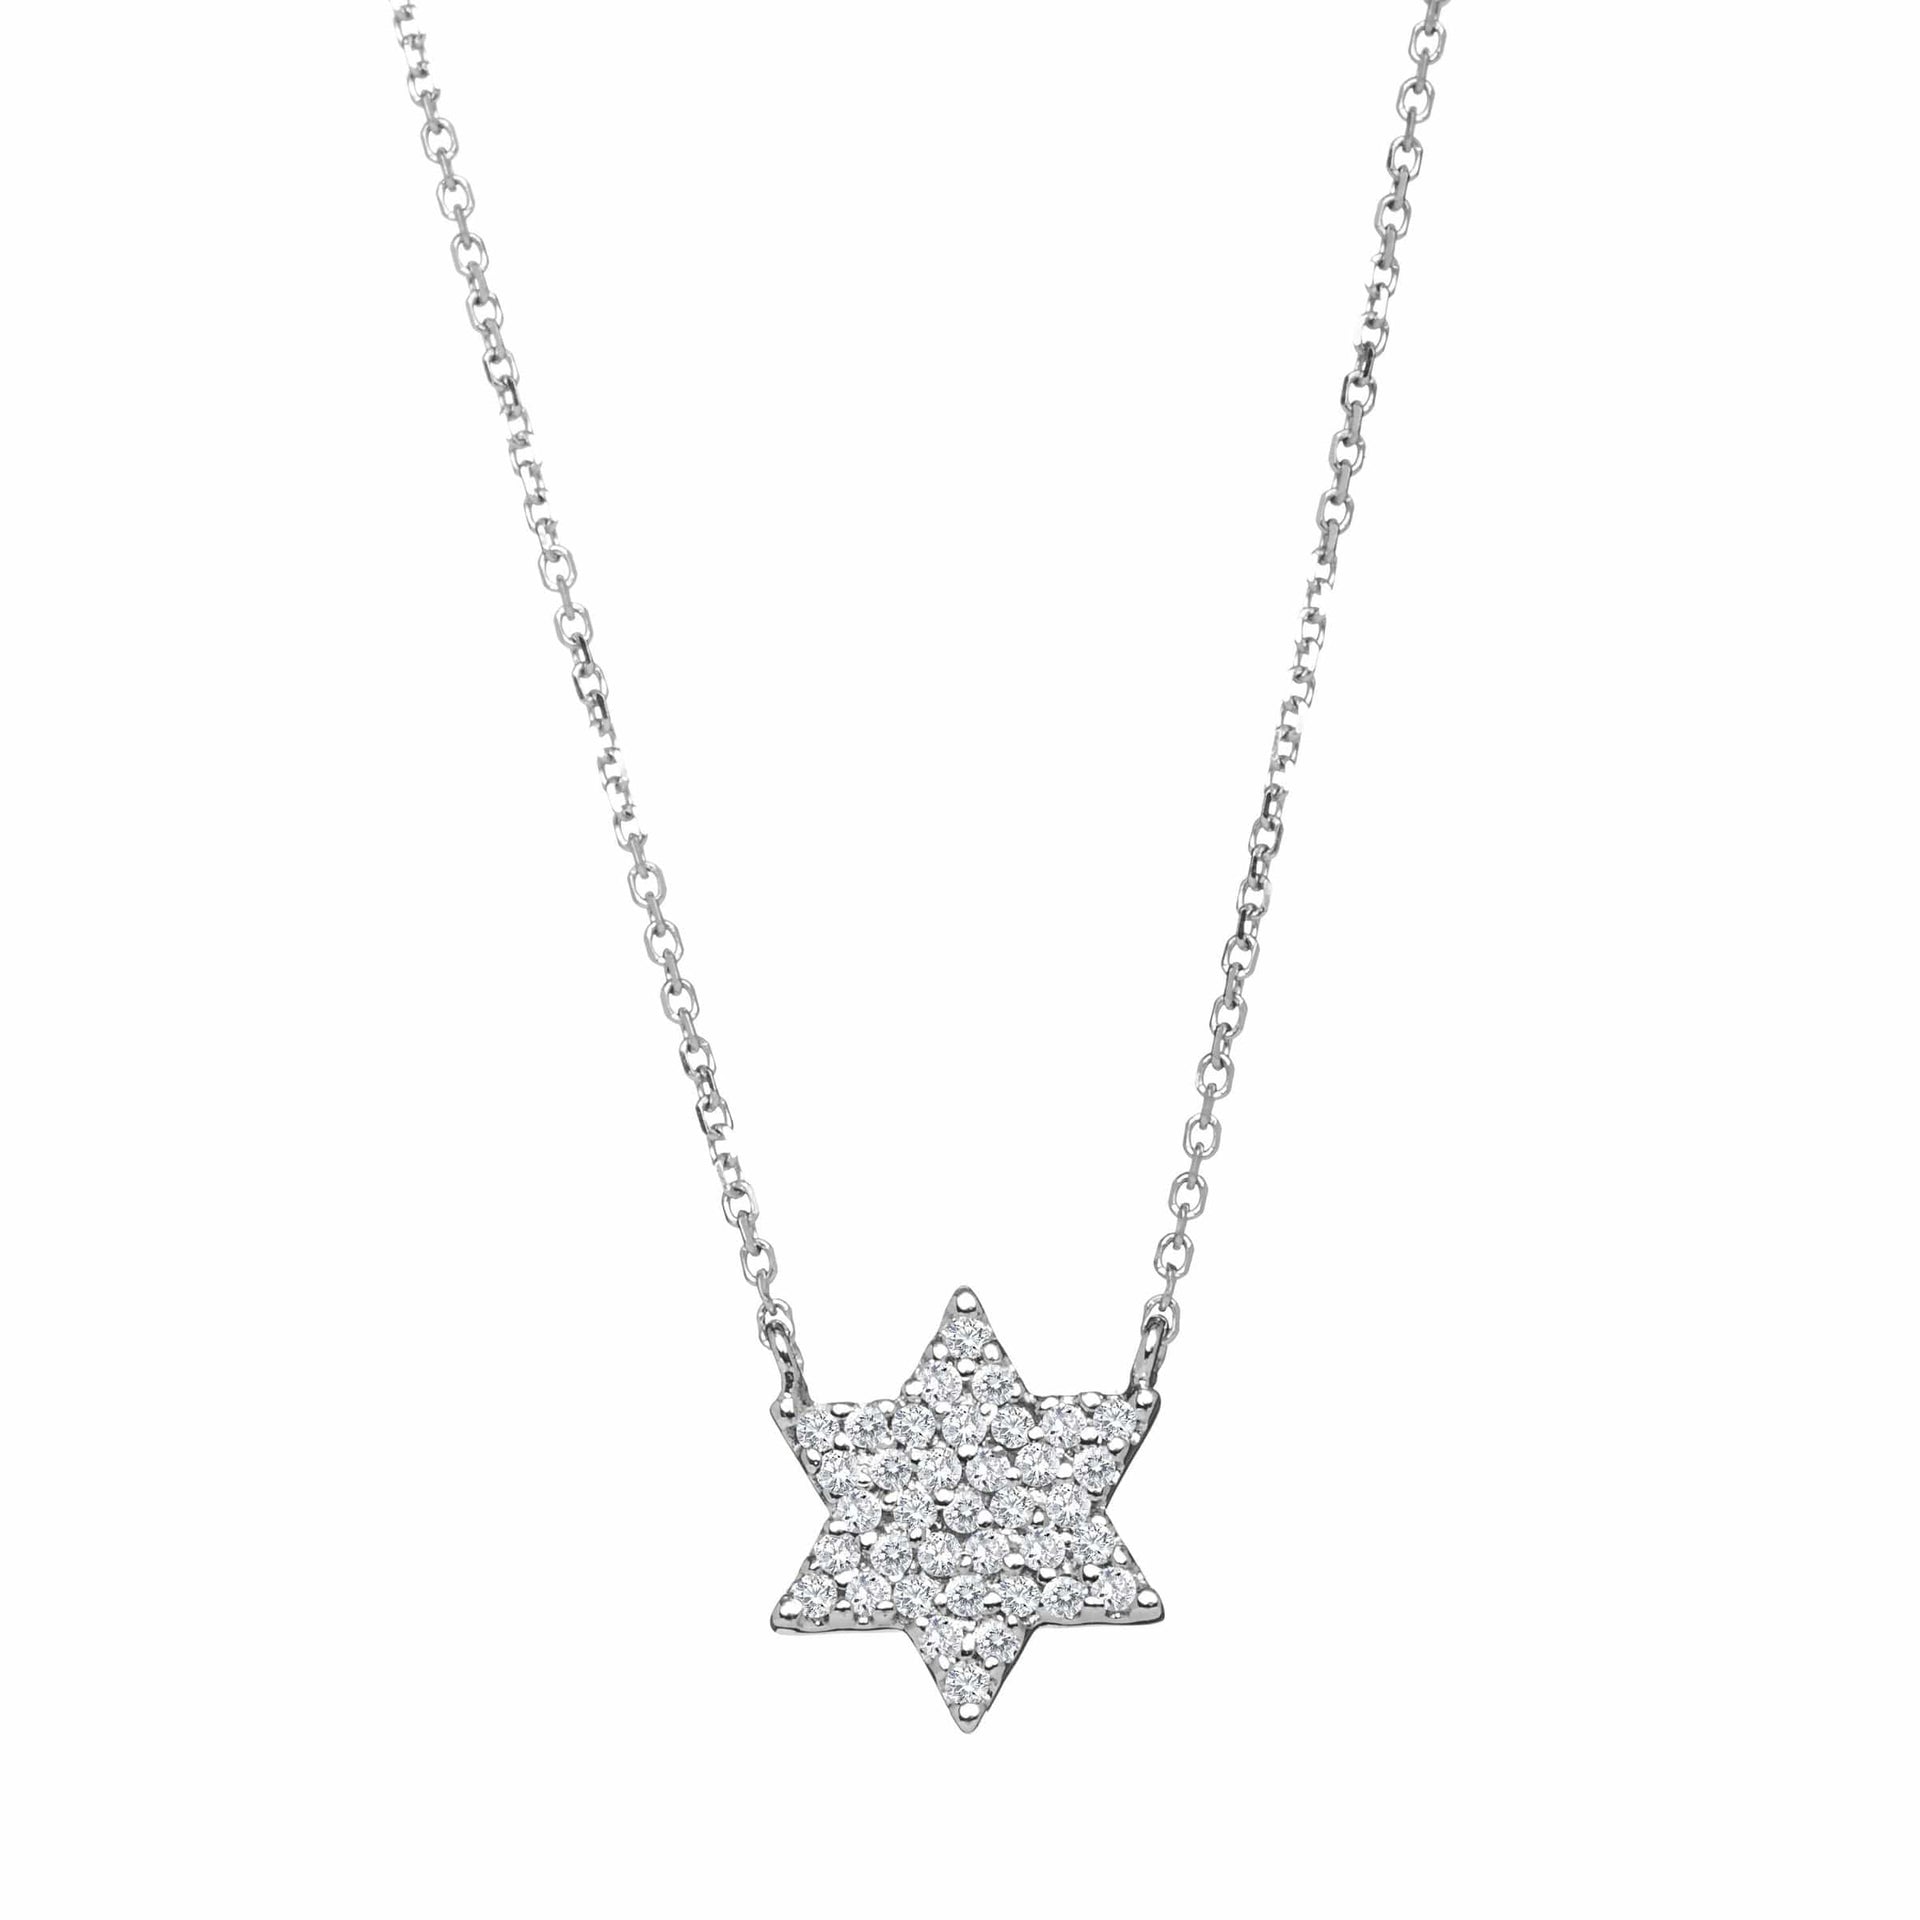 Alef Bet Necklaces White Gold Diamond Star of David Necklace - White Gold